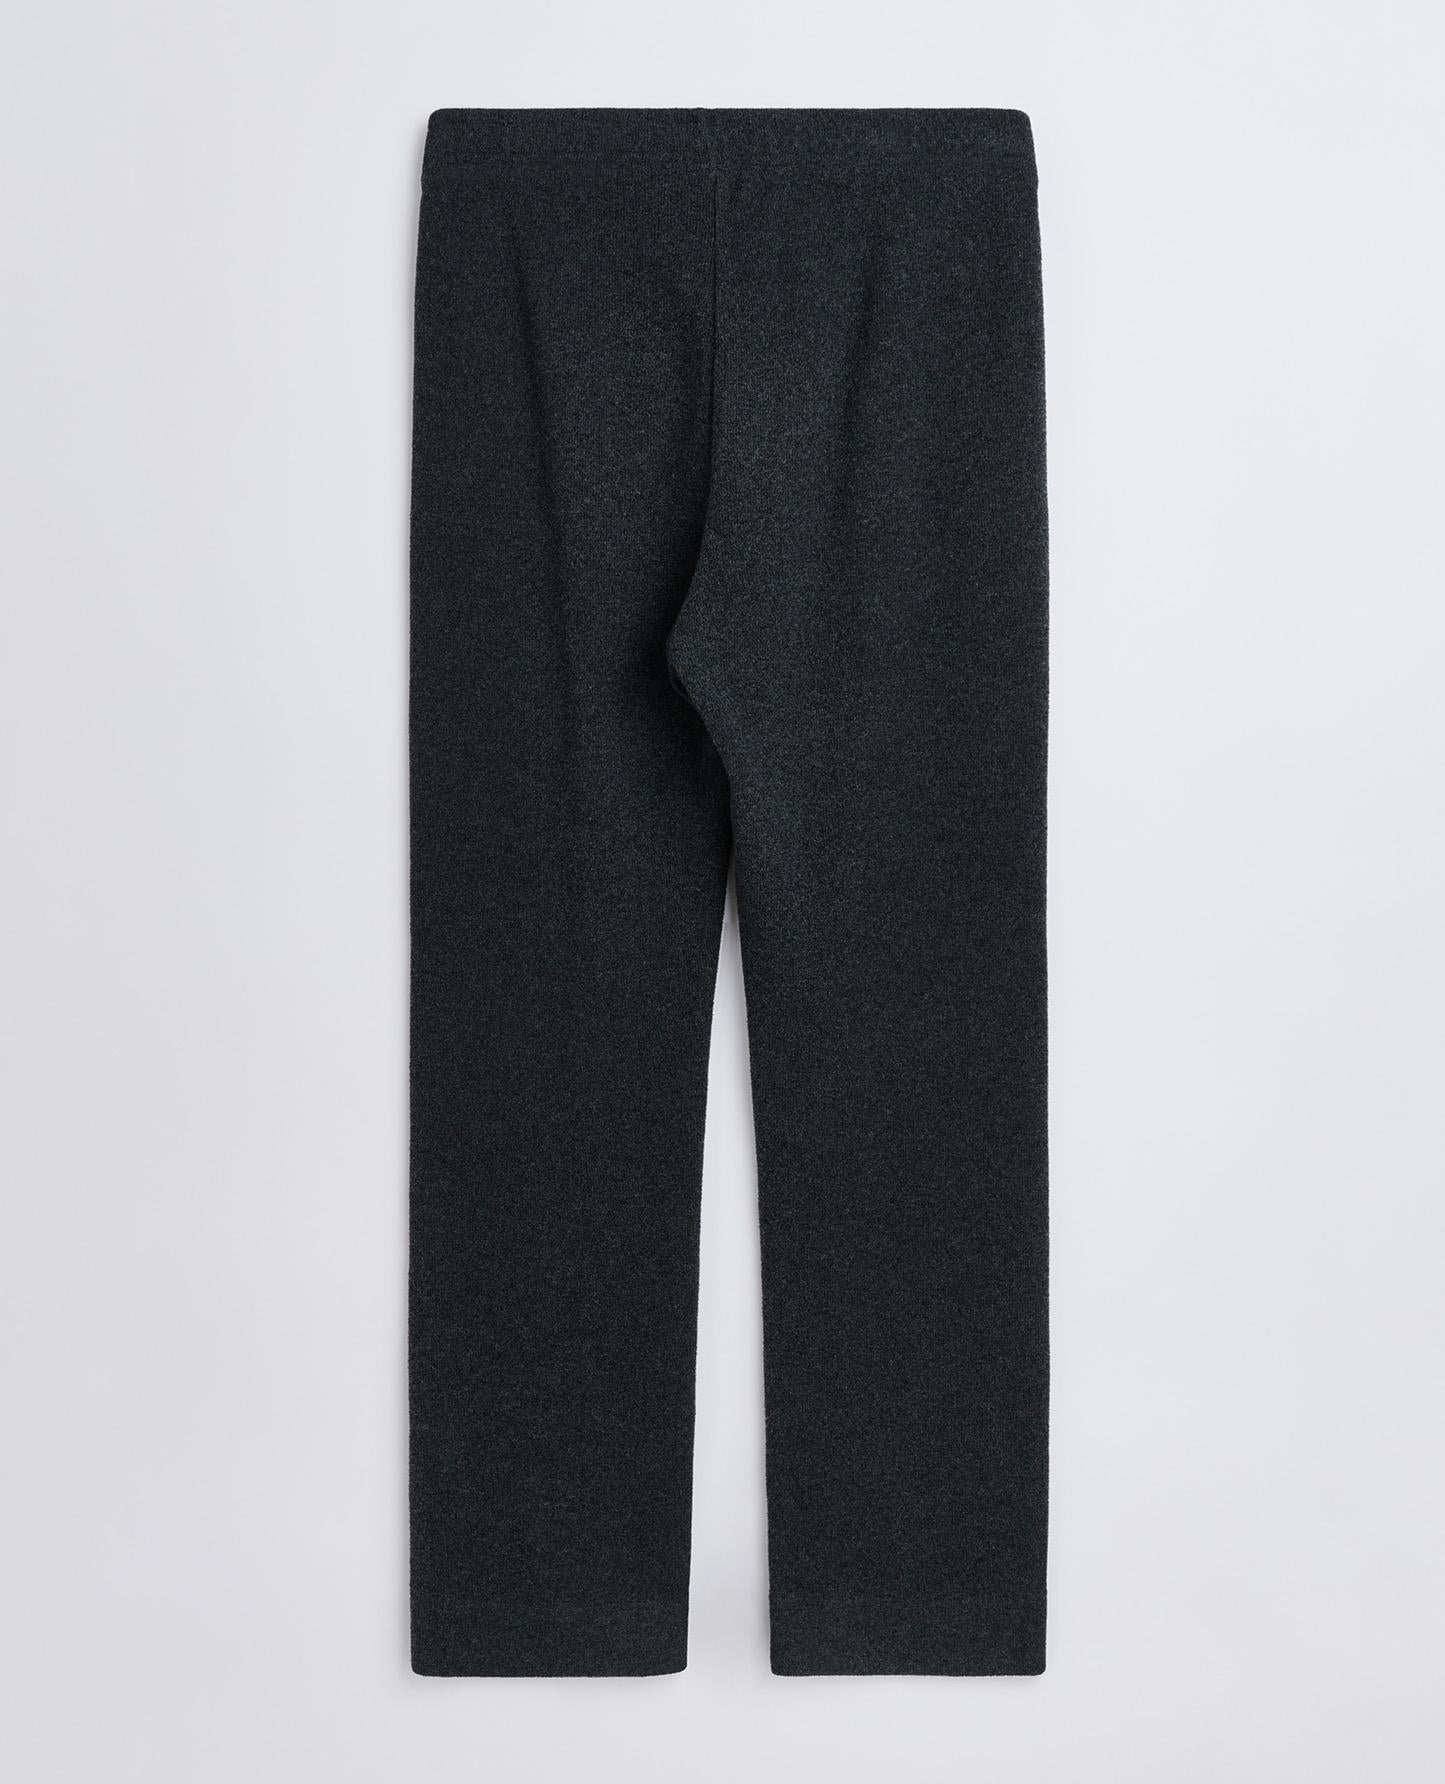 WOOL TRACK PANTS . ANTRACITE